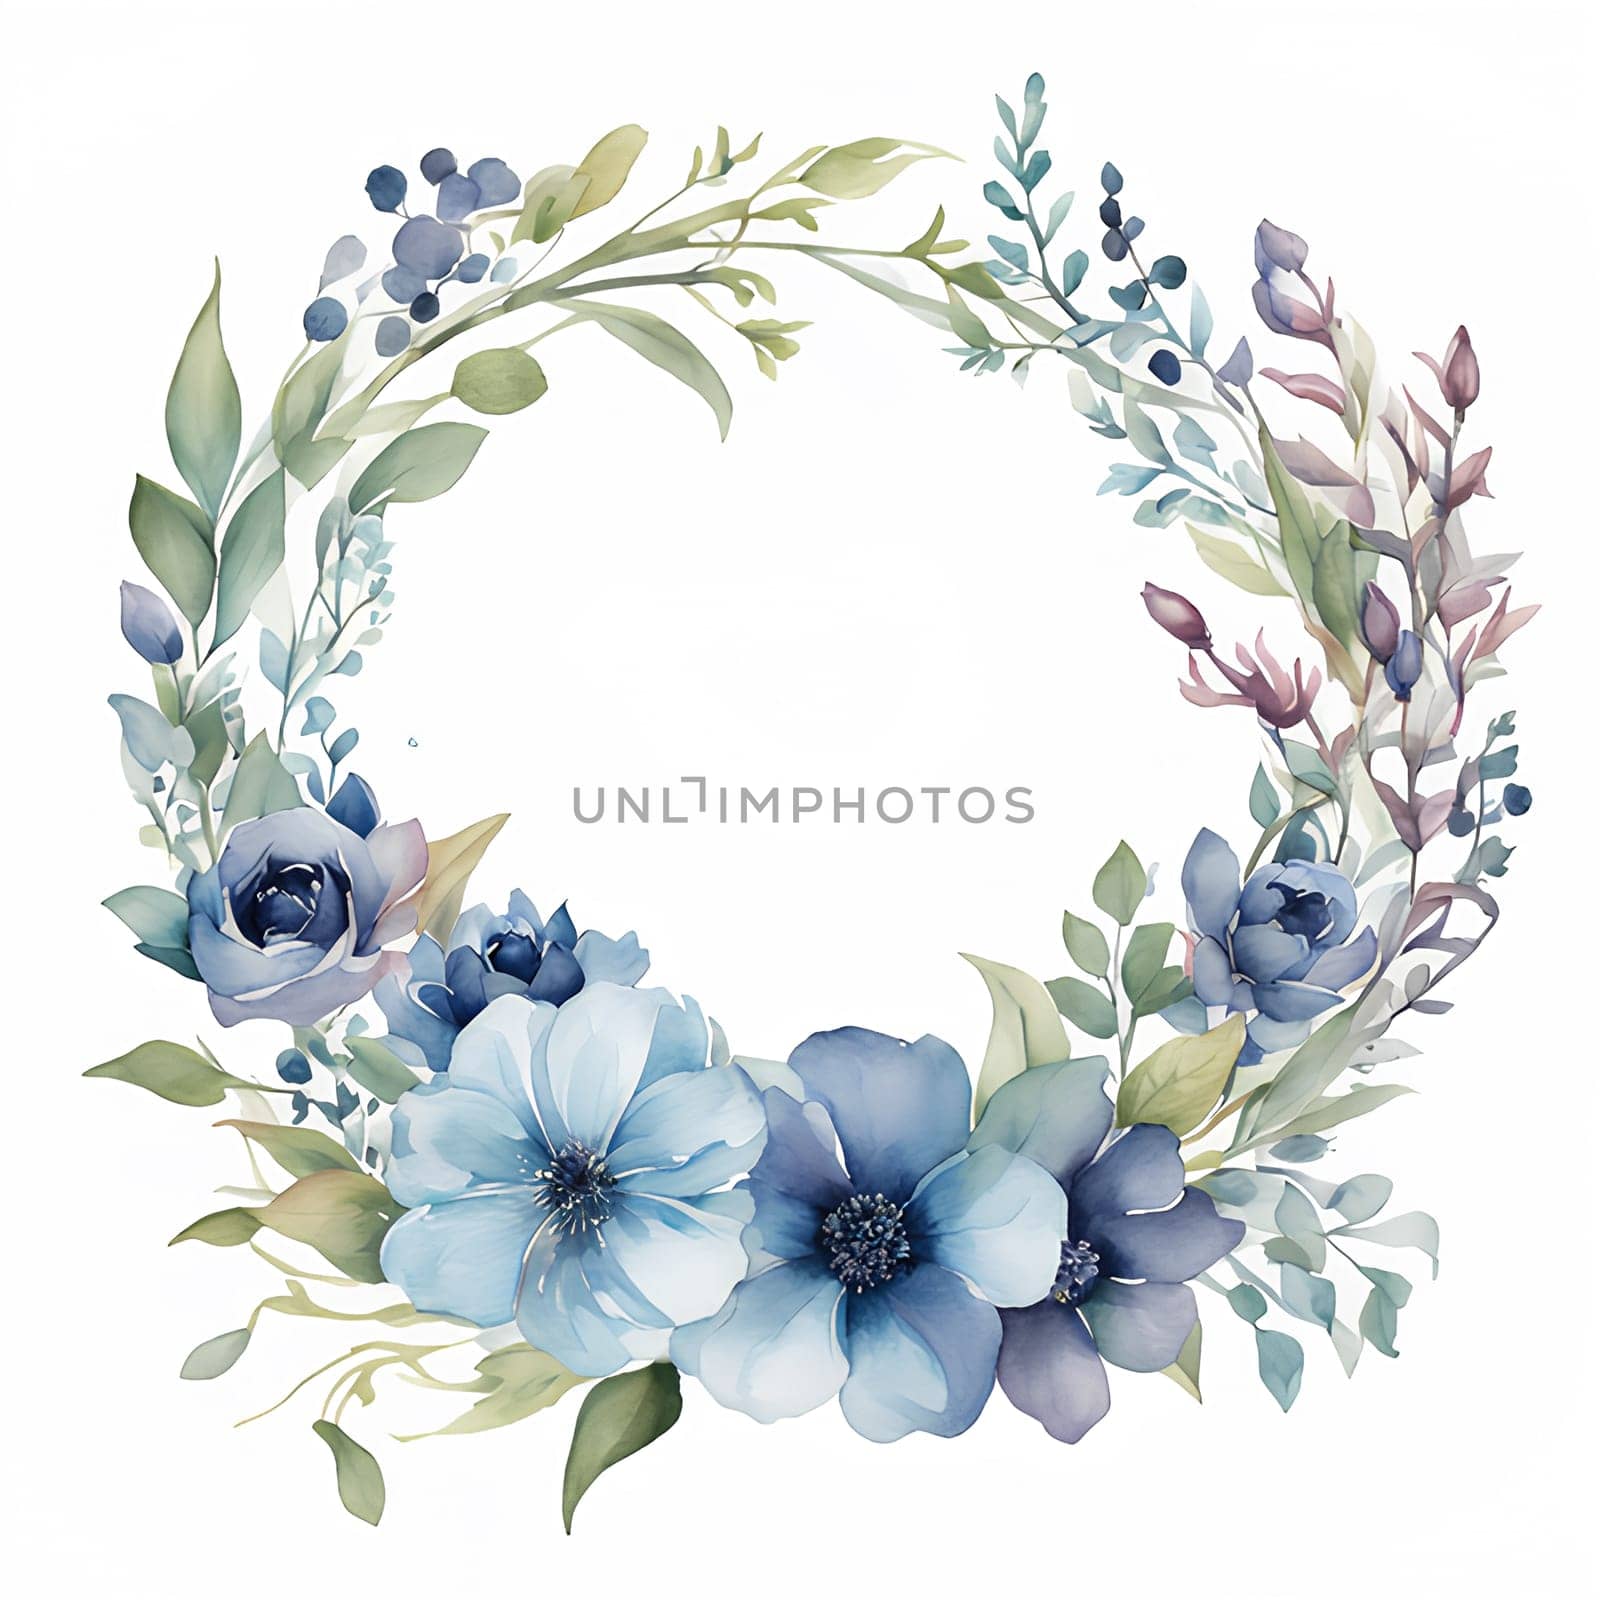 Watercolor flowers wreath in cold colors. by Annu1tochka